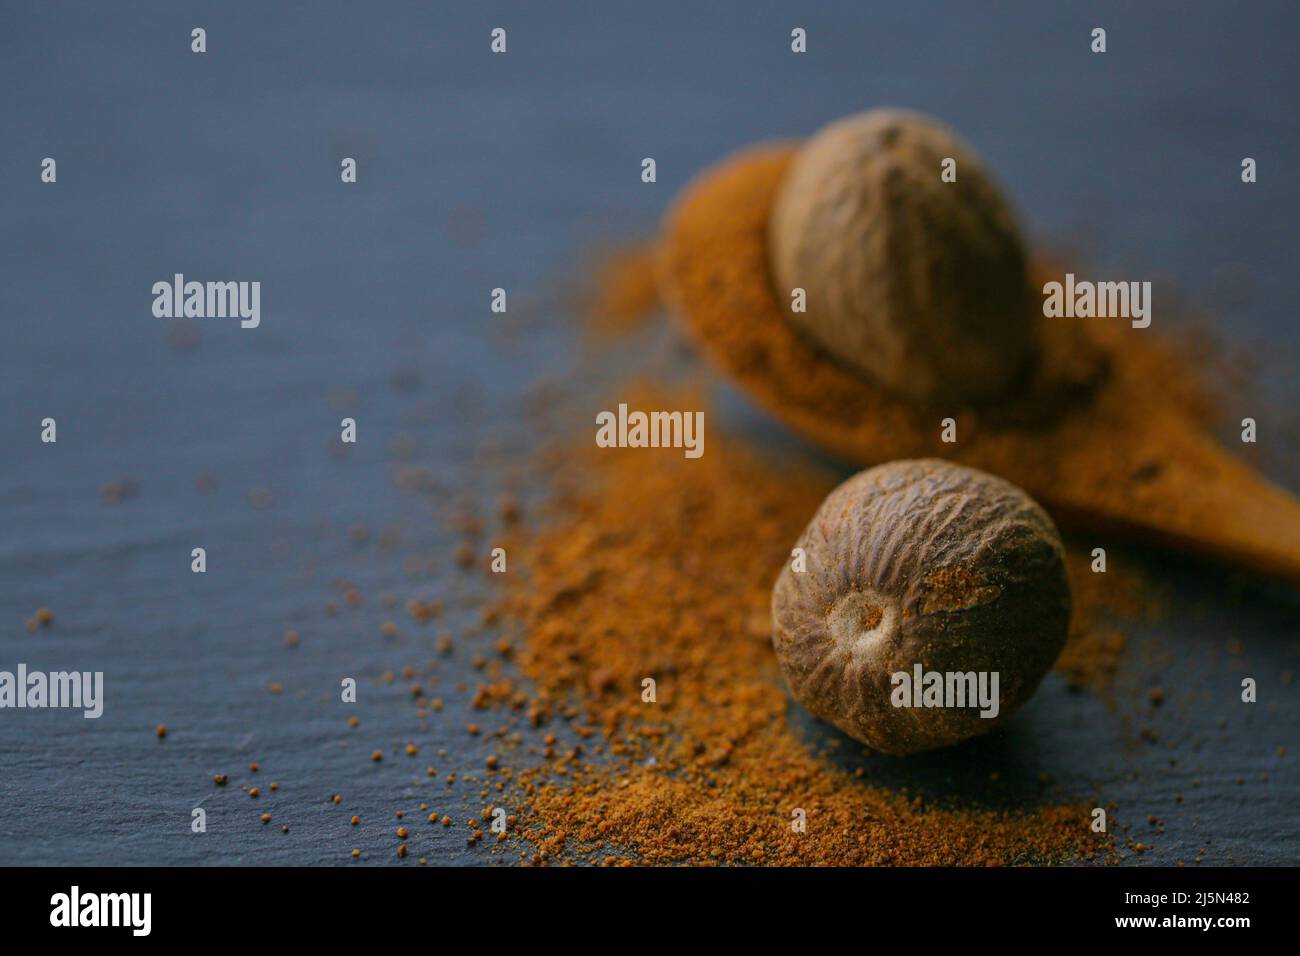 Nutmeg and nutmeg powder in a spoon on a black slate background.Spices and condiments.Nutmeg close-up on a dark background. Dark mood. Stock Photo